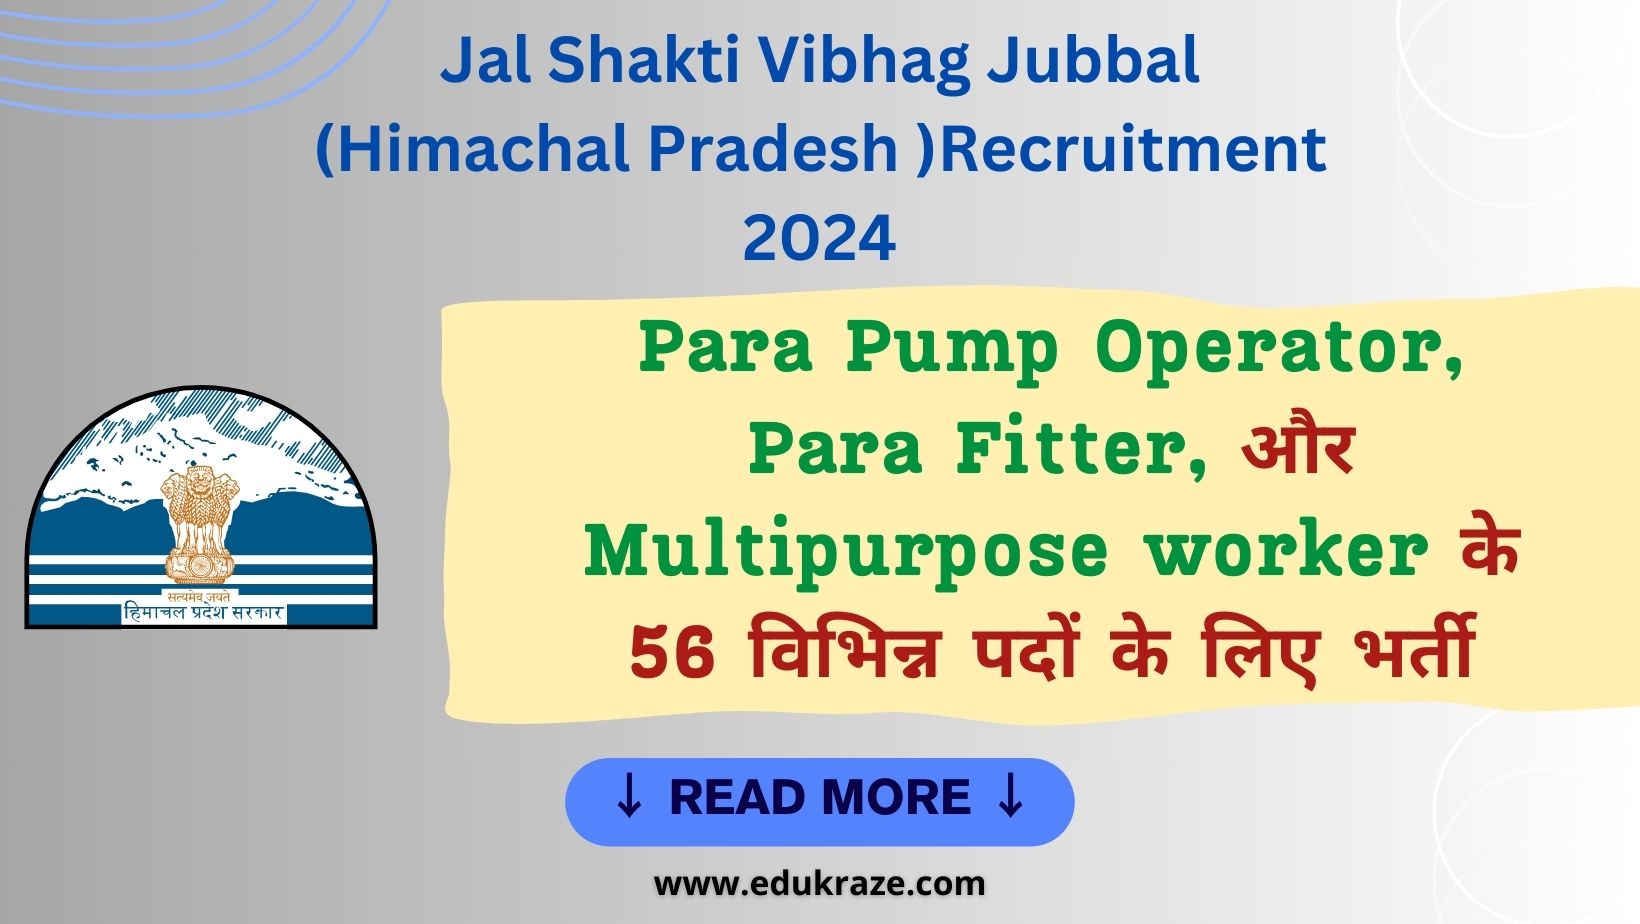 You are currently viewing Para Pump Operator, Para Fitter & Multipurpose Worker Recruitment Out at HP Jal Shakti Vibhag Division Jubbal